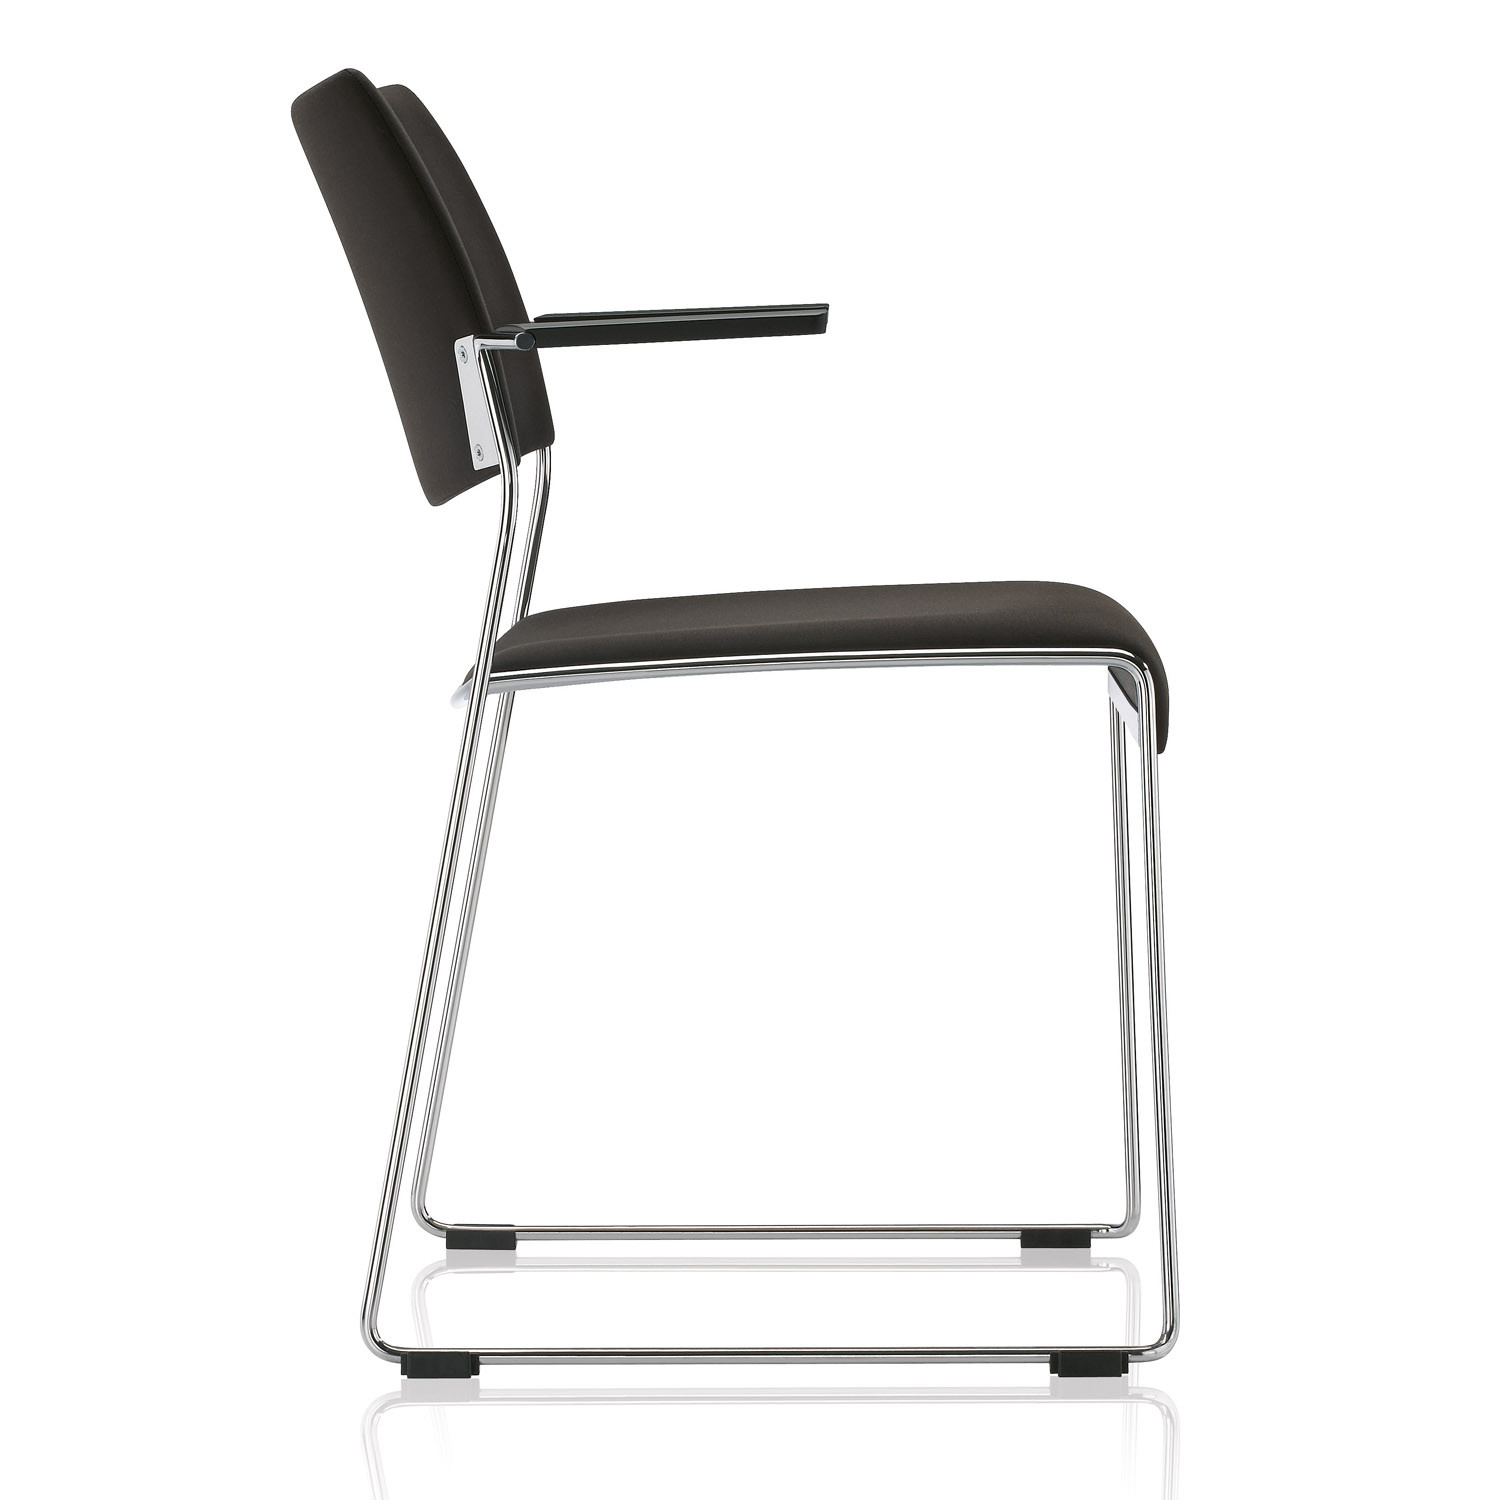 Linos Multipurpose Chair with arm rests